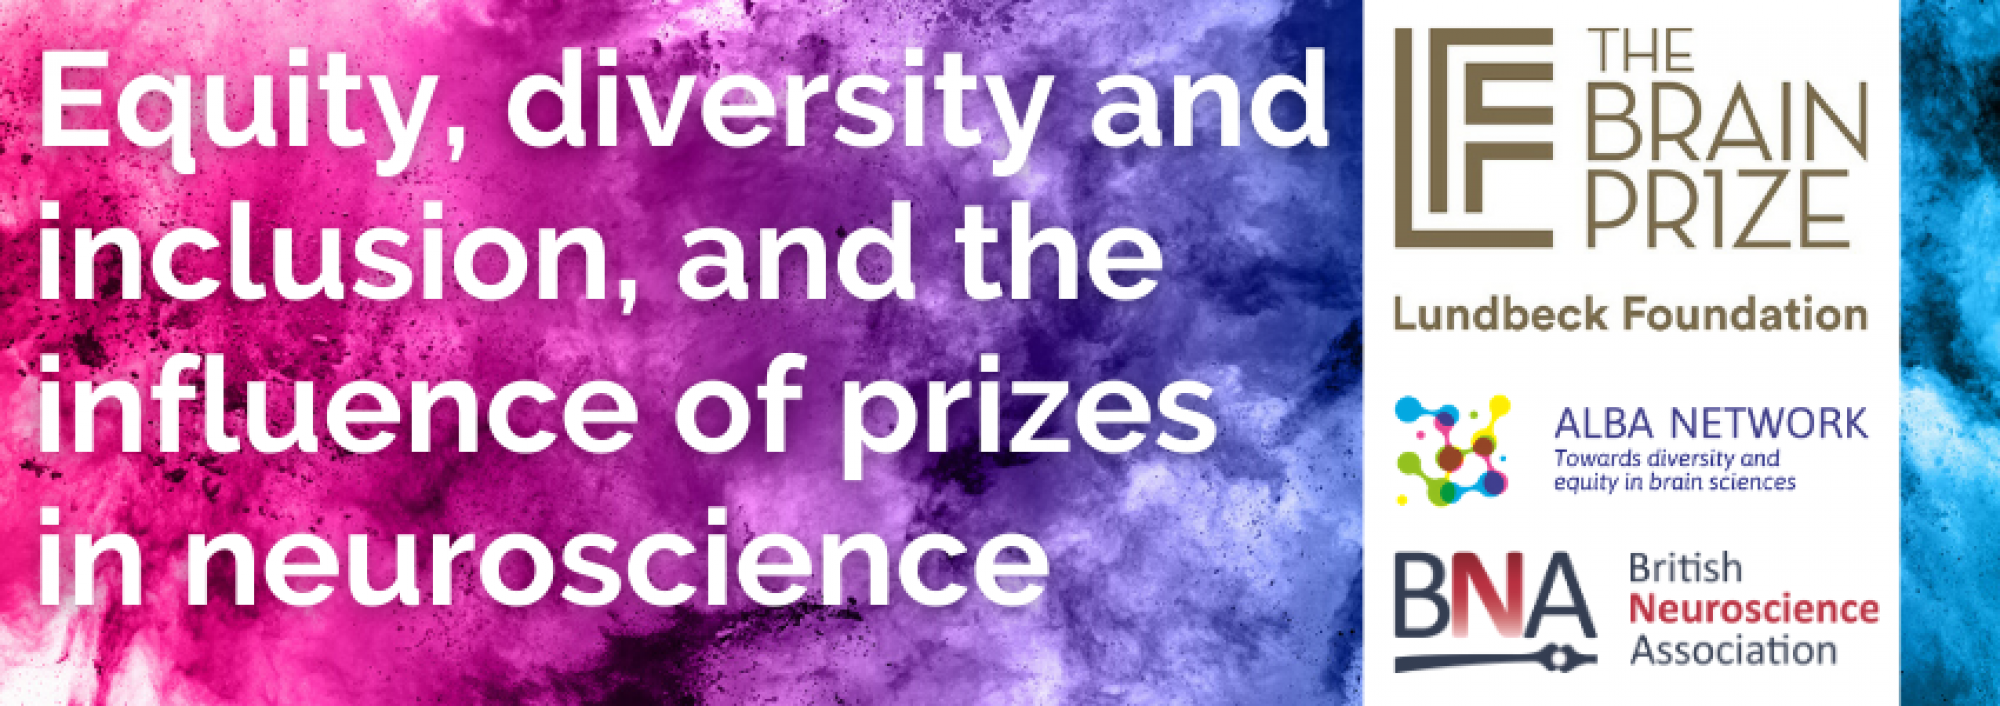 equity, diversity and inclusion, and the influence of prizes in neuroscience